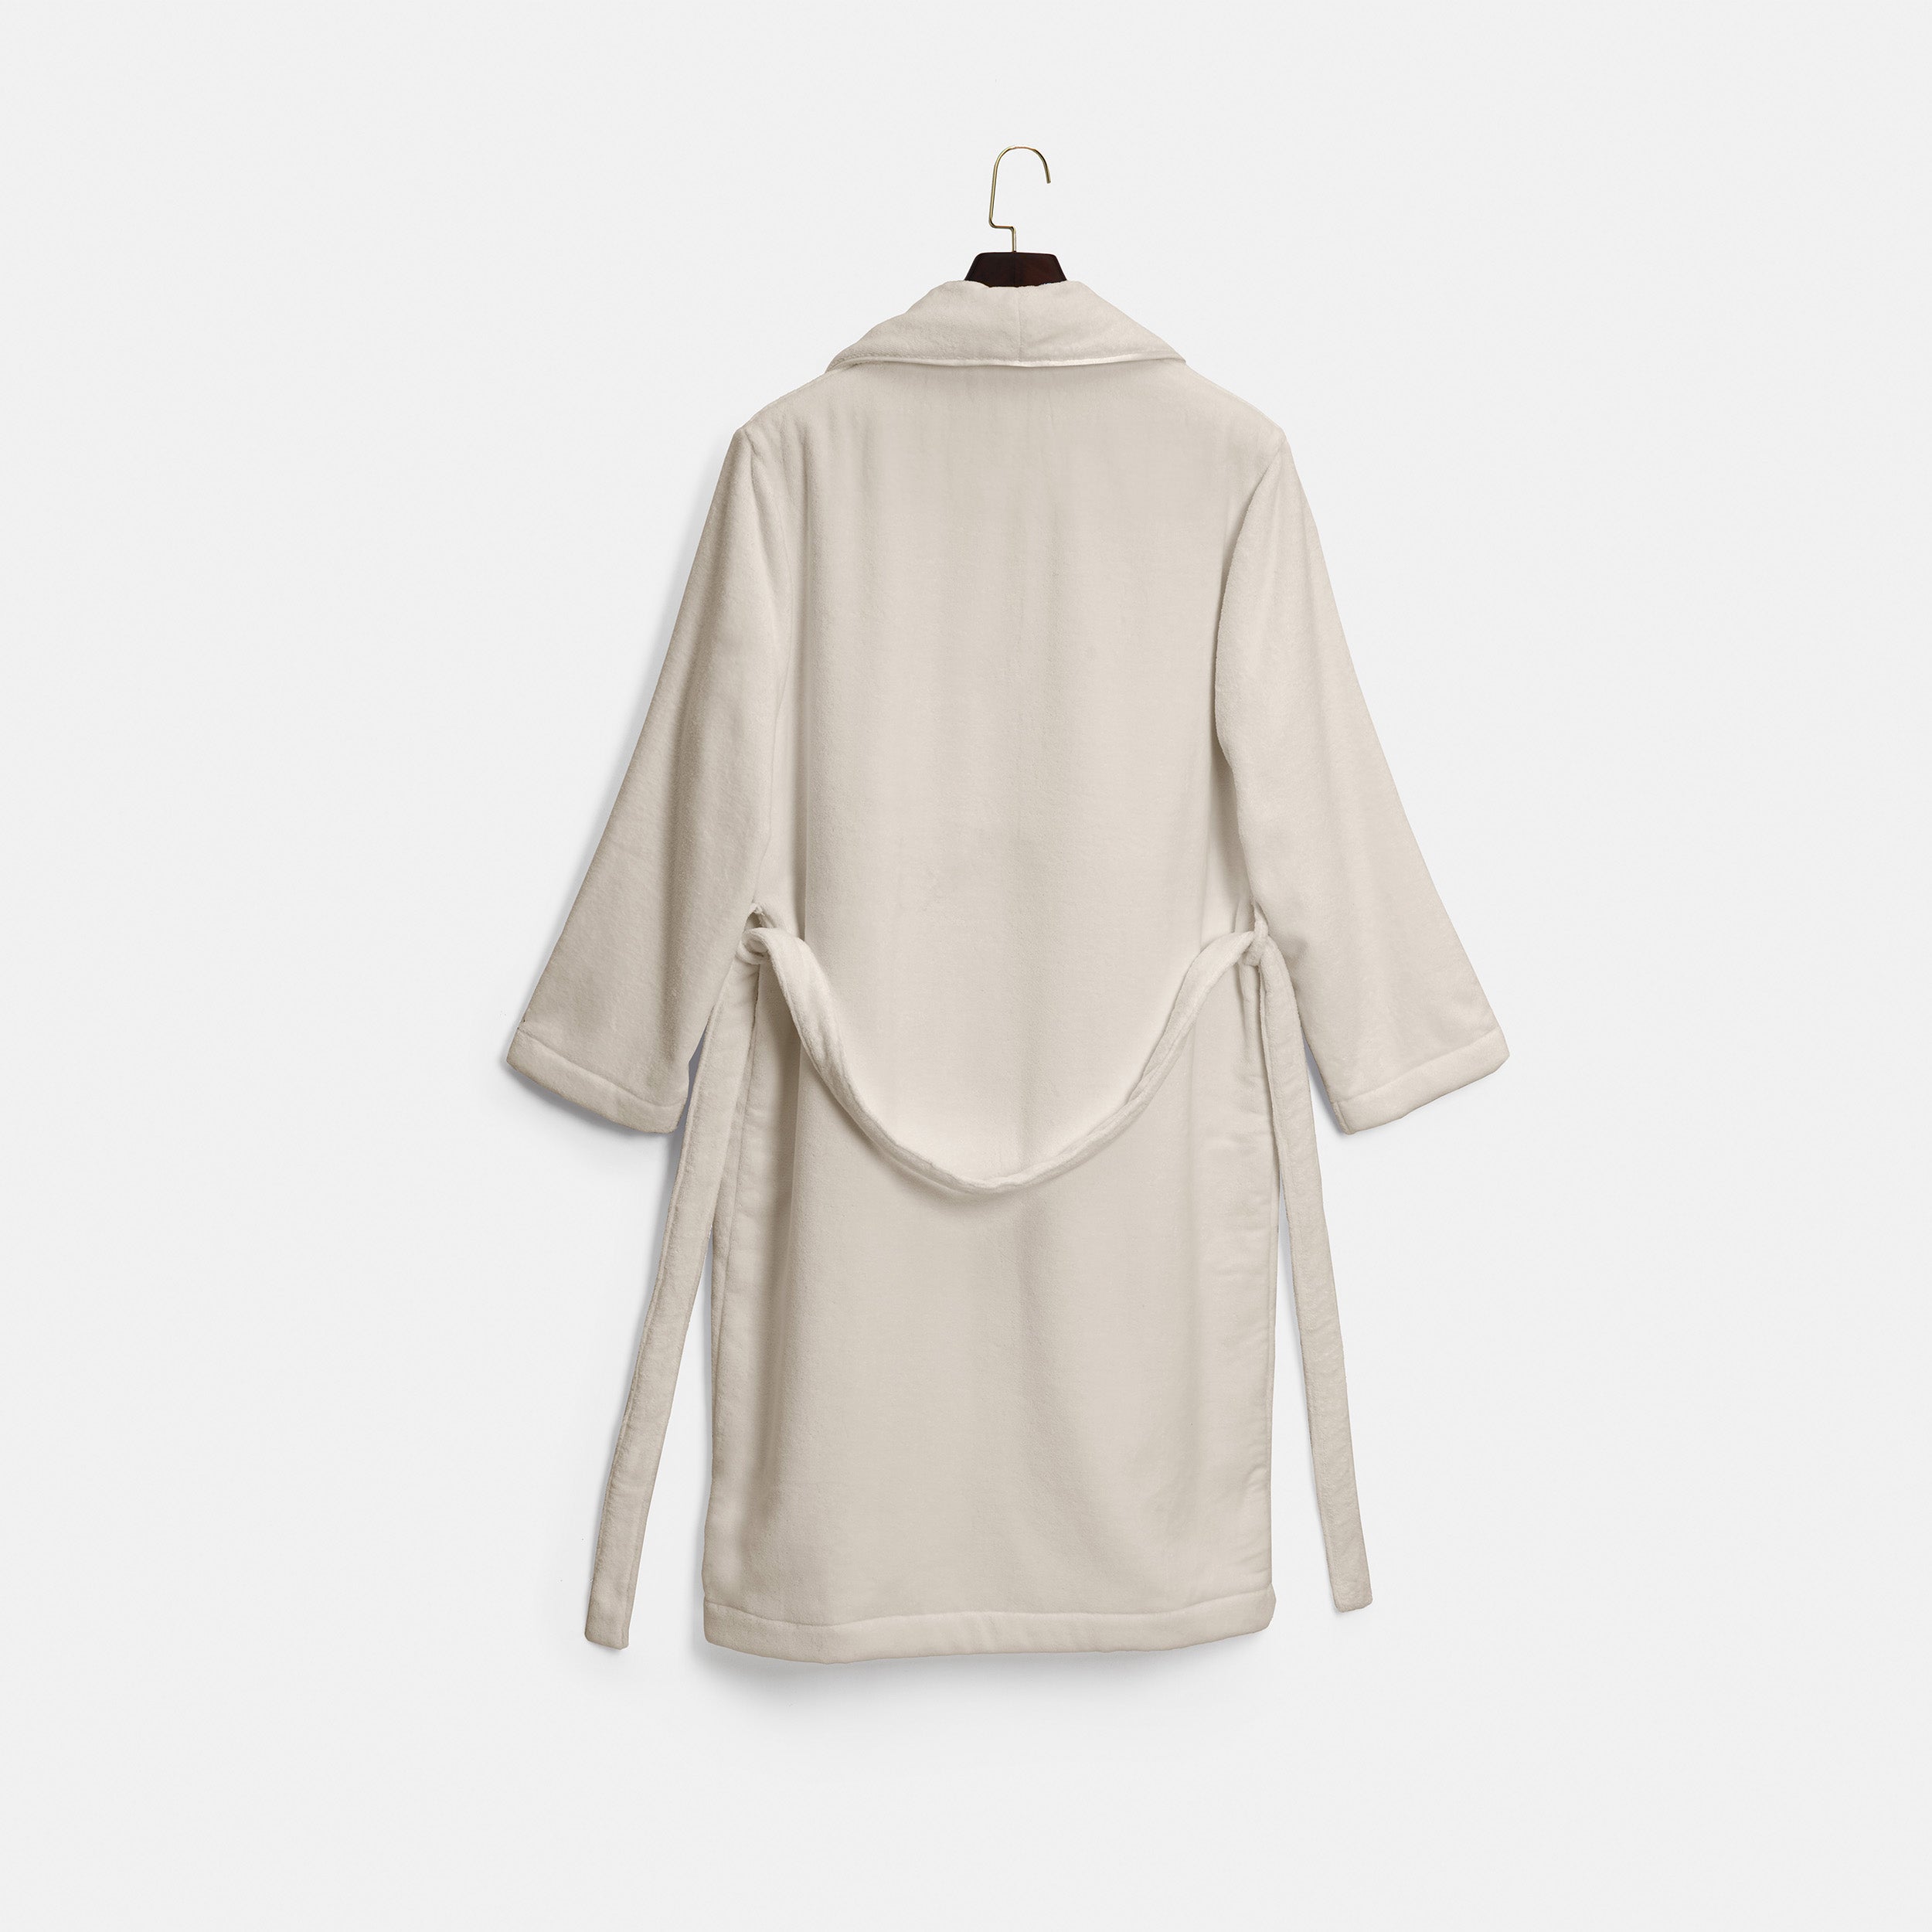 Heritage Robe Terry / X-Small / Moscato Beige, Heritage Robe Terry / Small / Moscato Beige, Heritage Robe Terry / Medium / Moscato Beige, Heritage Robe Terry / Large / Moscato Beige, Heritage Robe Terry / X-Large / Moscato Beige